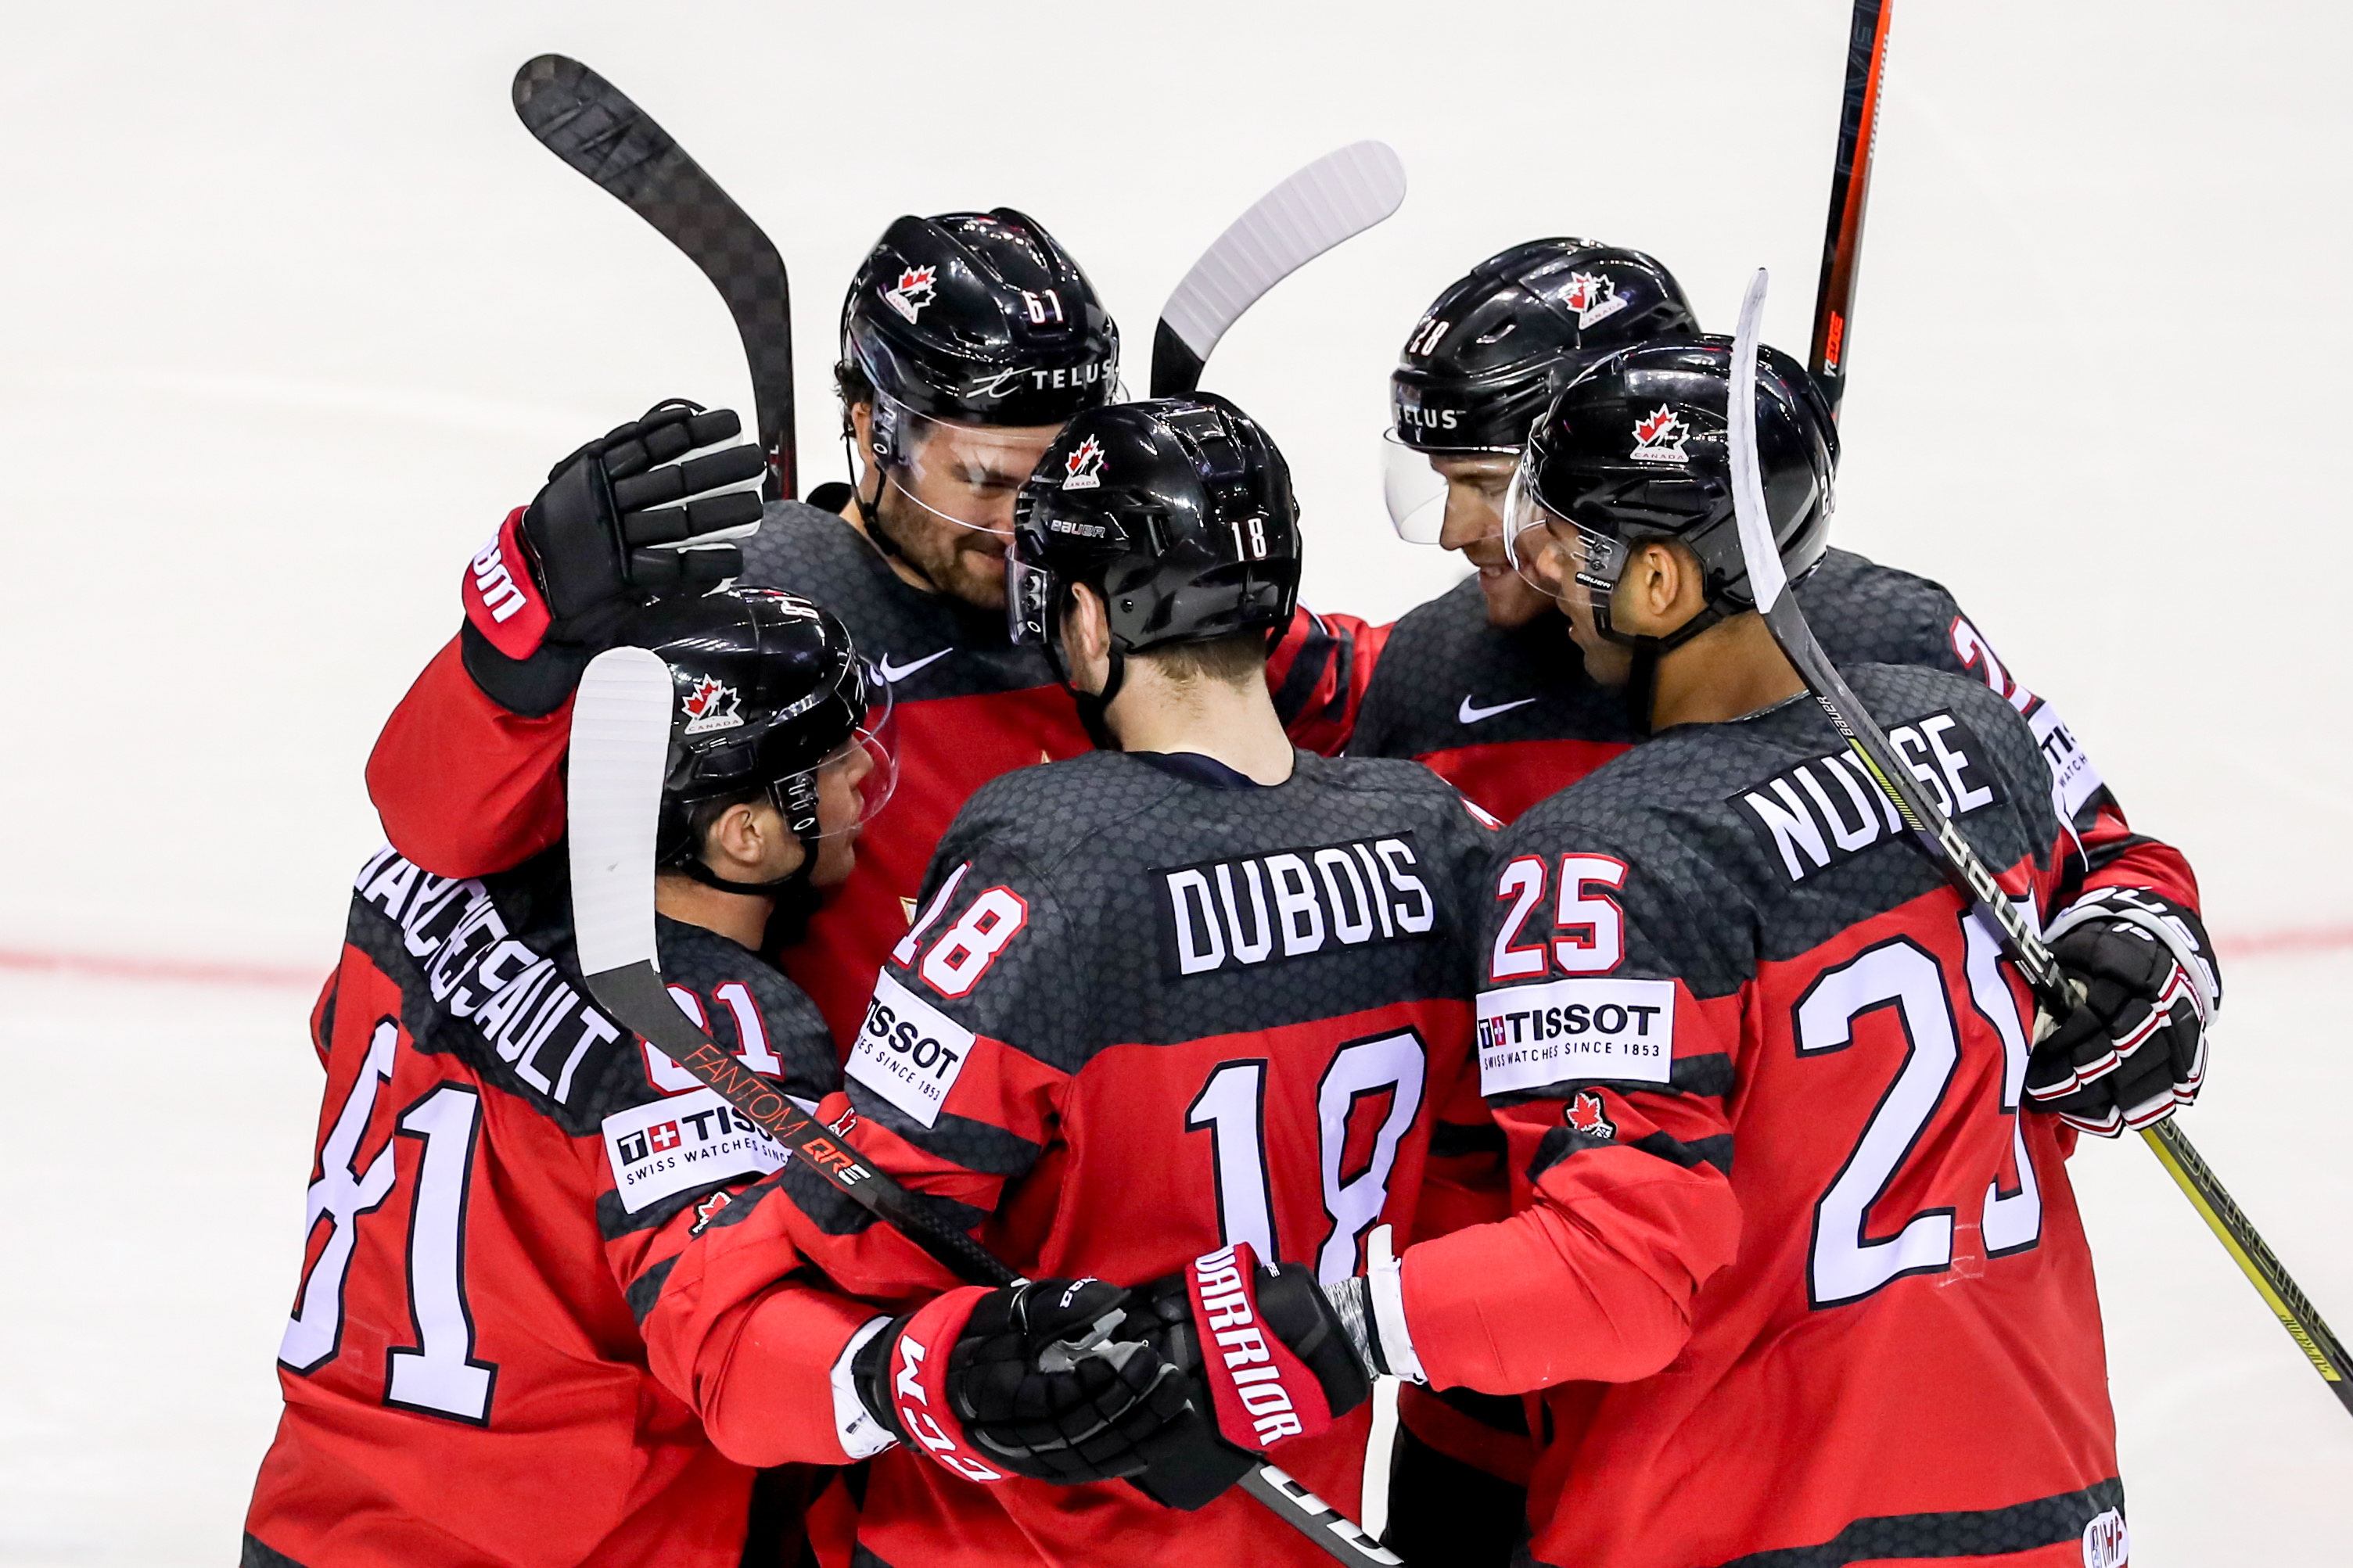 epa07590127 Players of Canda celebrate goal during the IIHF World Championship group A ice hockey match between Canada and USA at the Steel Arena in Kosice, Slovakia, 21 May 2019.  EPA/MARTIN DIVISEK